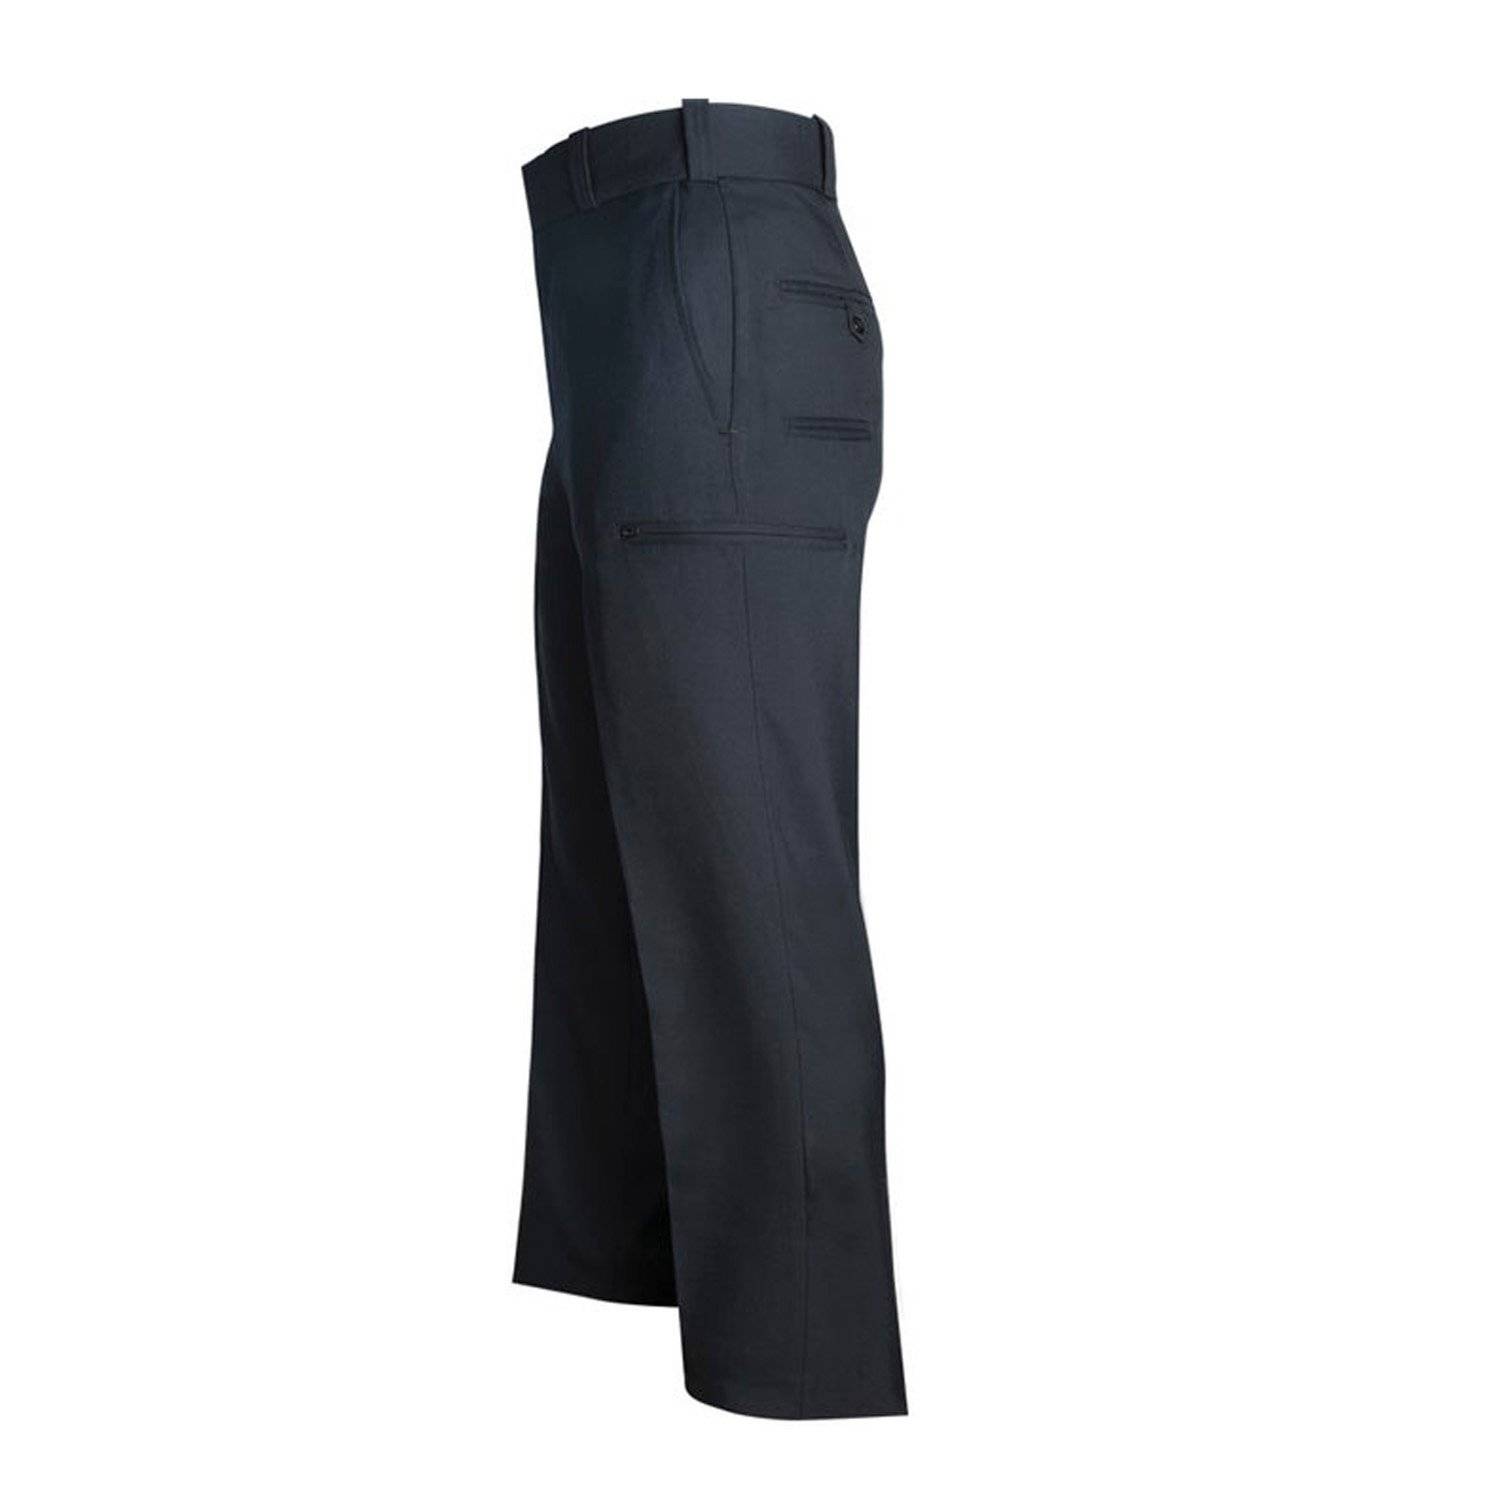 Flying Cross Justice Men's Pants w/ Route Book Pocket